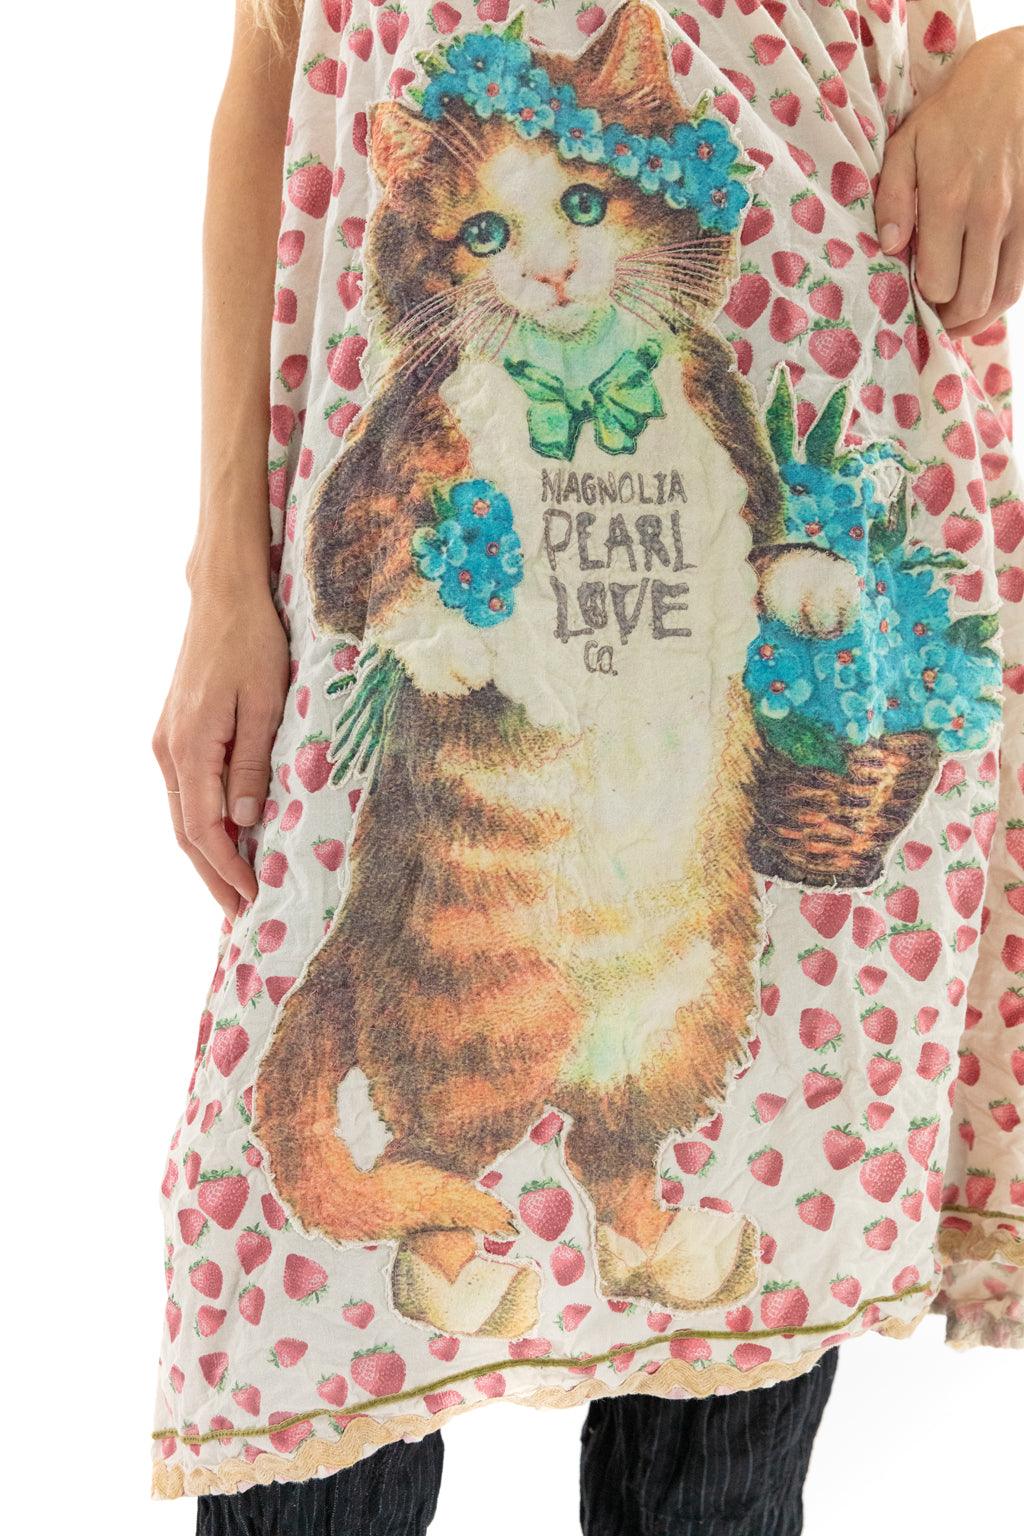 Kitty Cat Clementine Slip - Magnolia Pearl Clothing